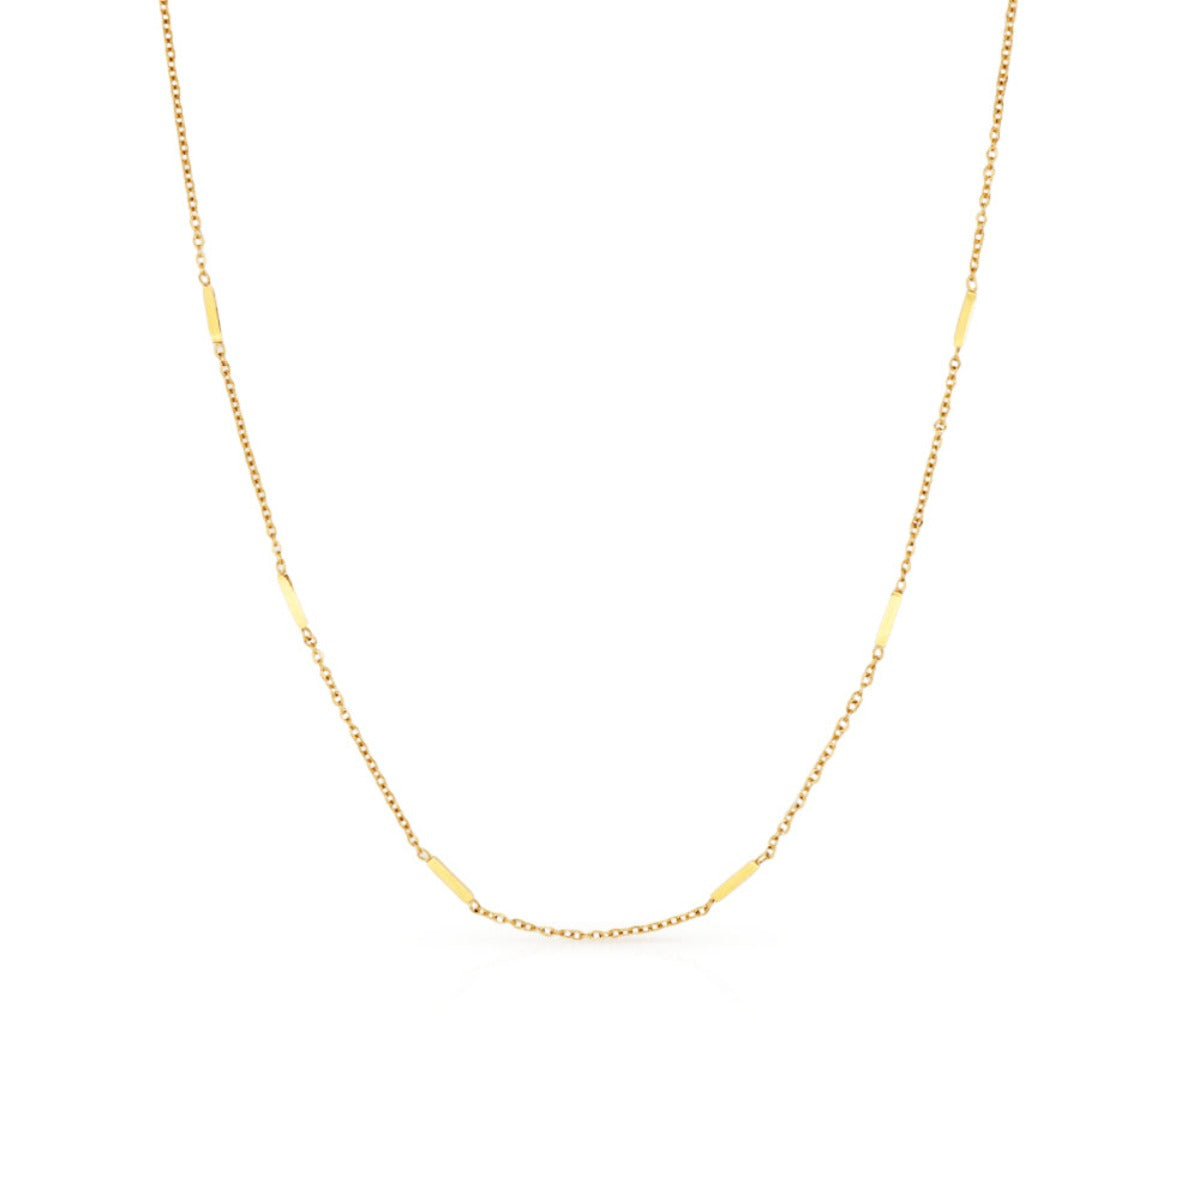 Block satellite chains name gold plating necklace chain accessories for women 